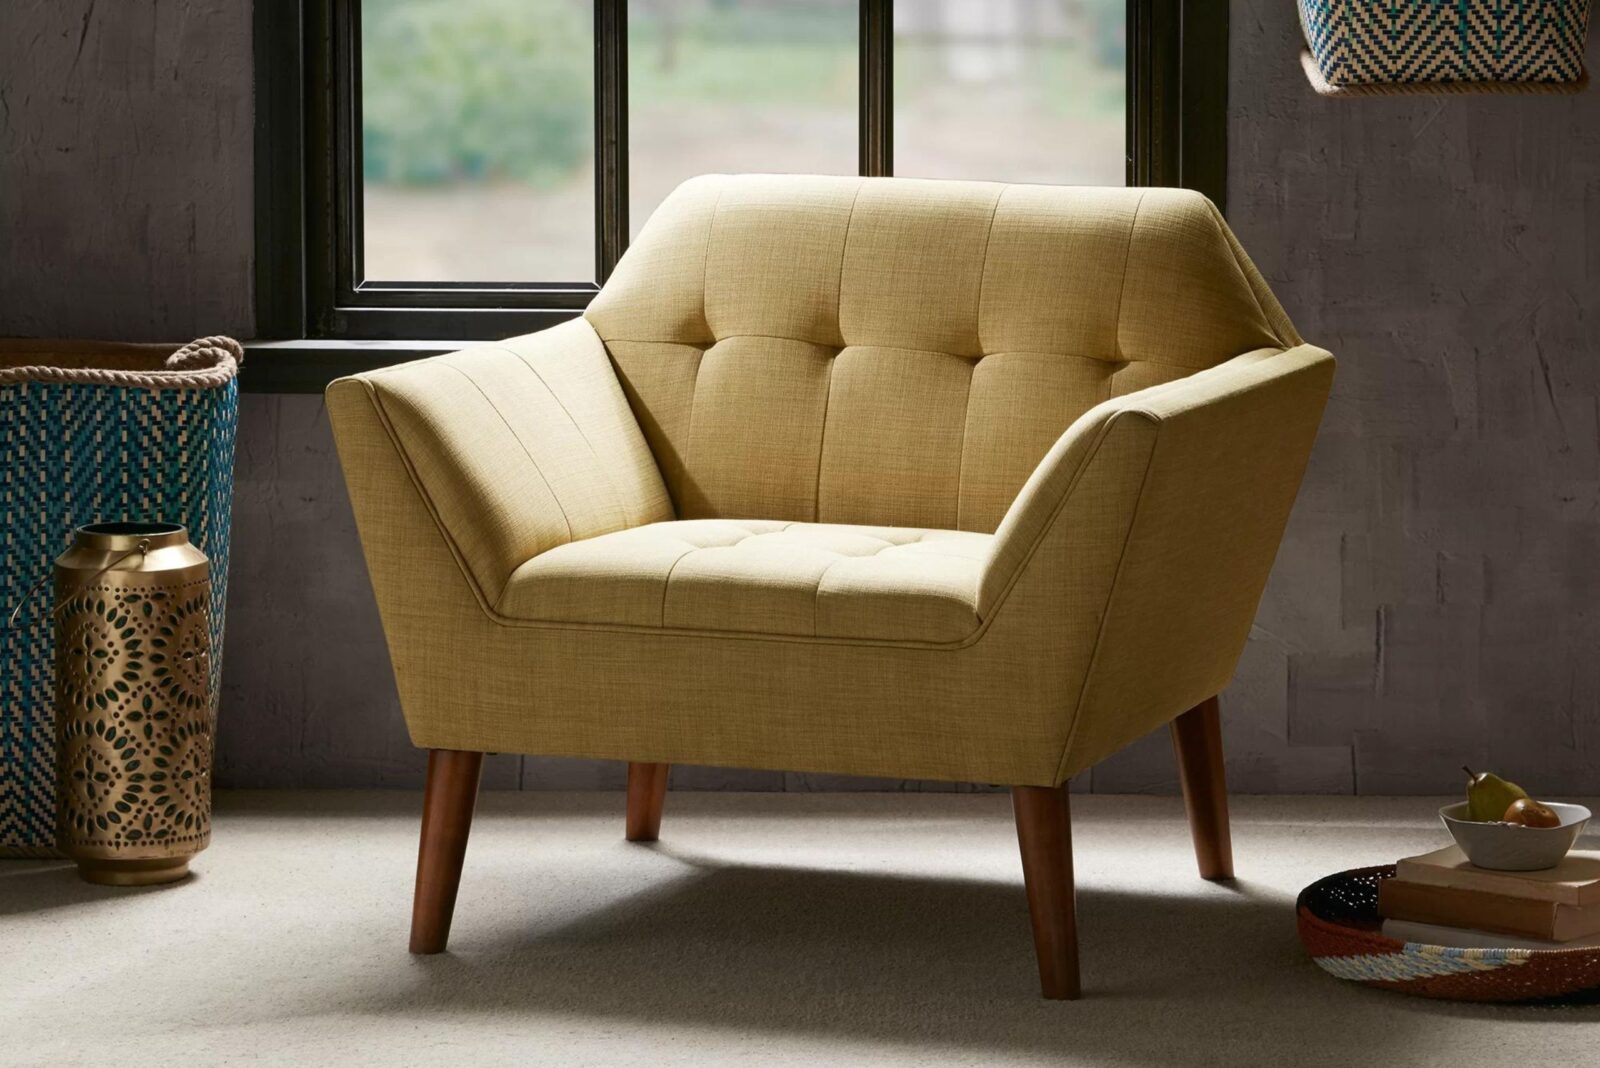 15 Best Small Living Room Chairs for the Perfect Accent Piece